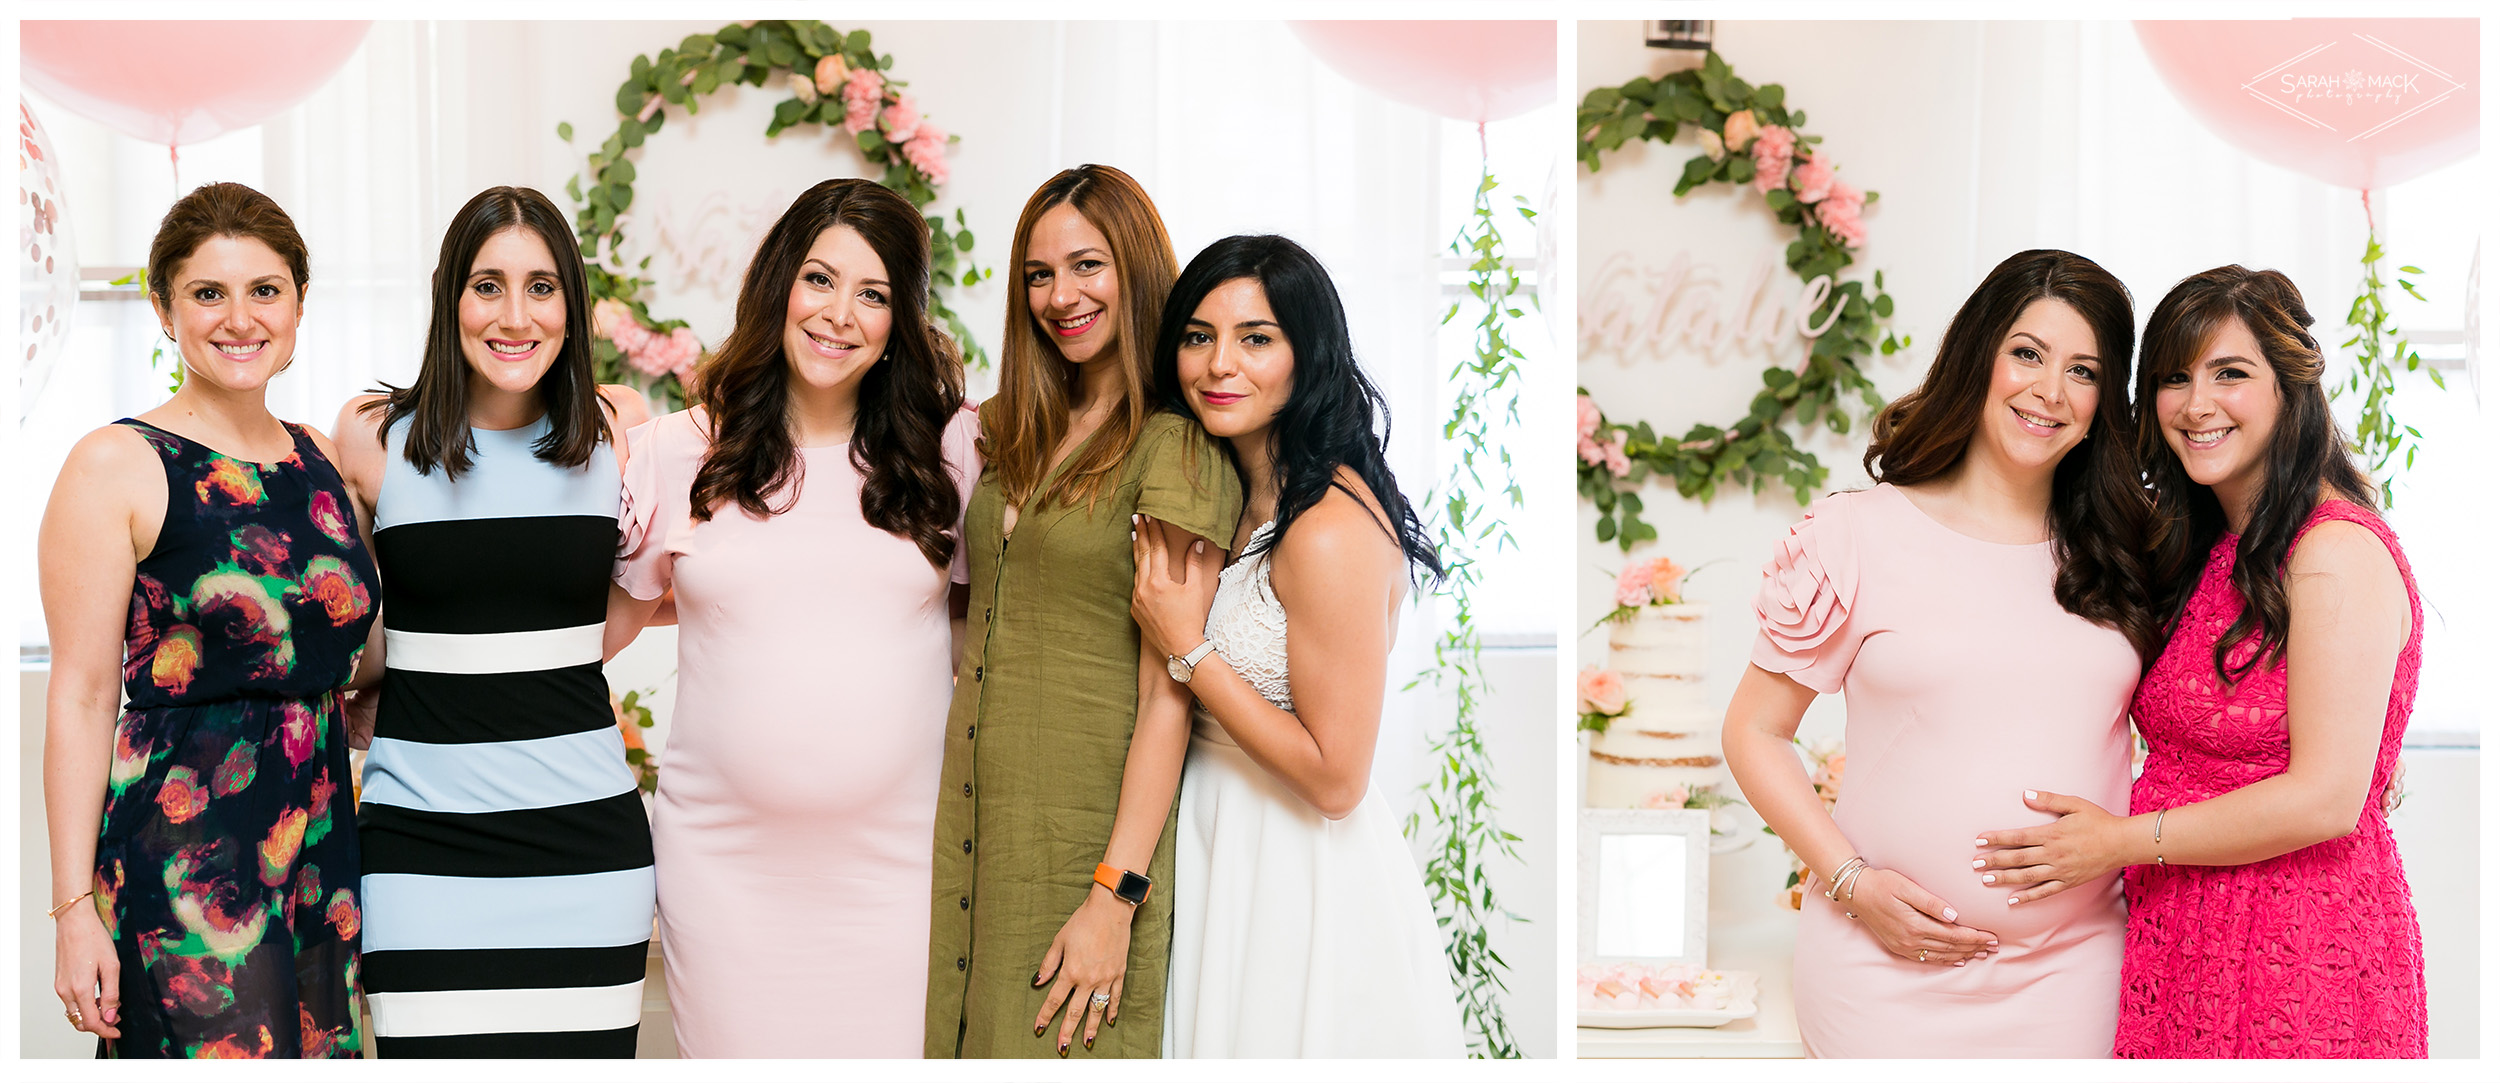 M-Fig-and-Olive-Newport-Beach-Baby-Shower-Photography-13.jpg